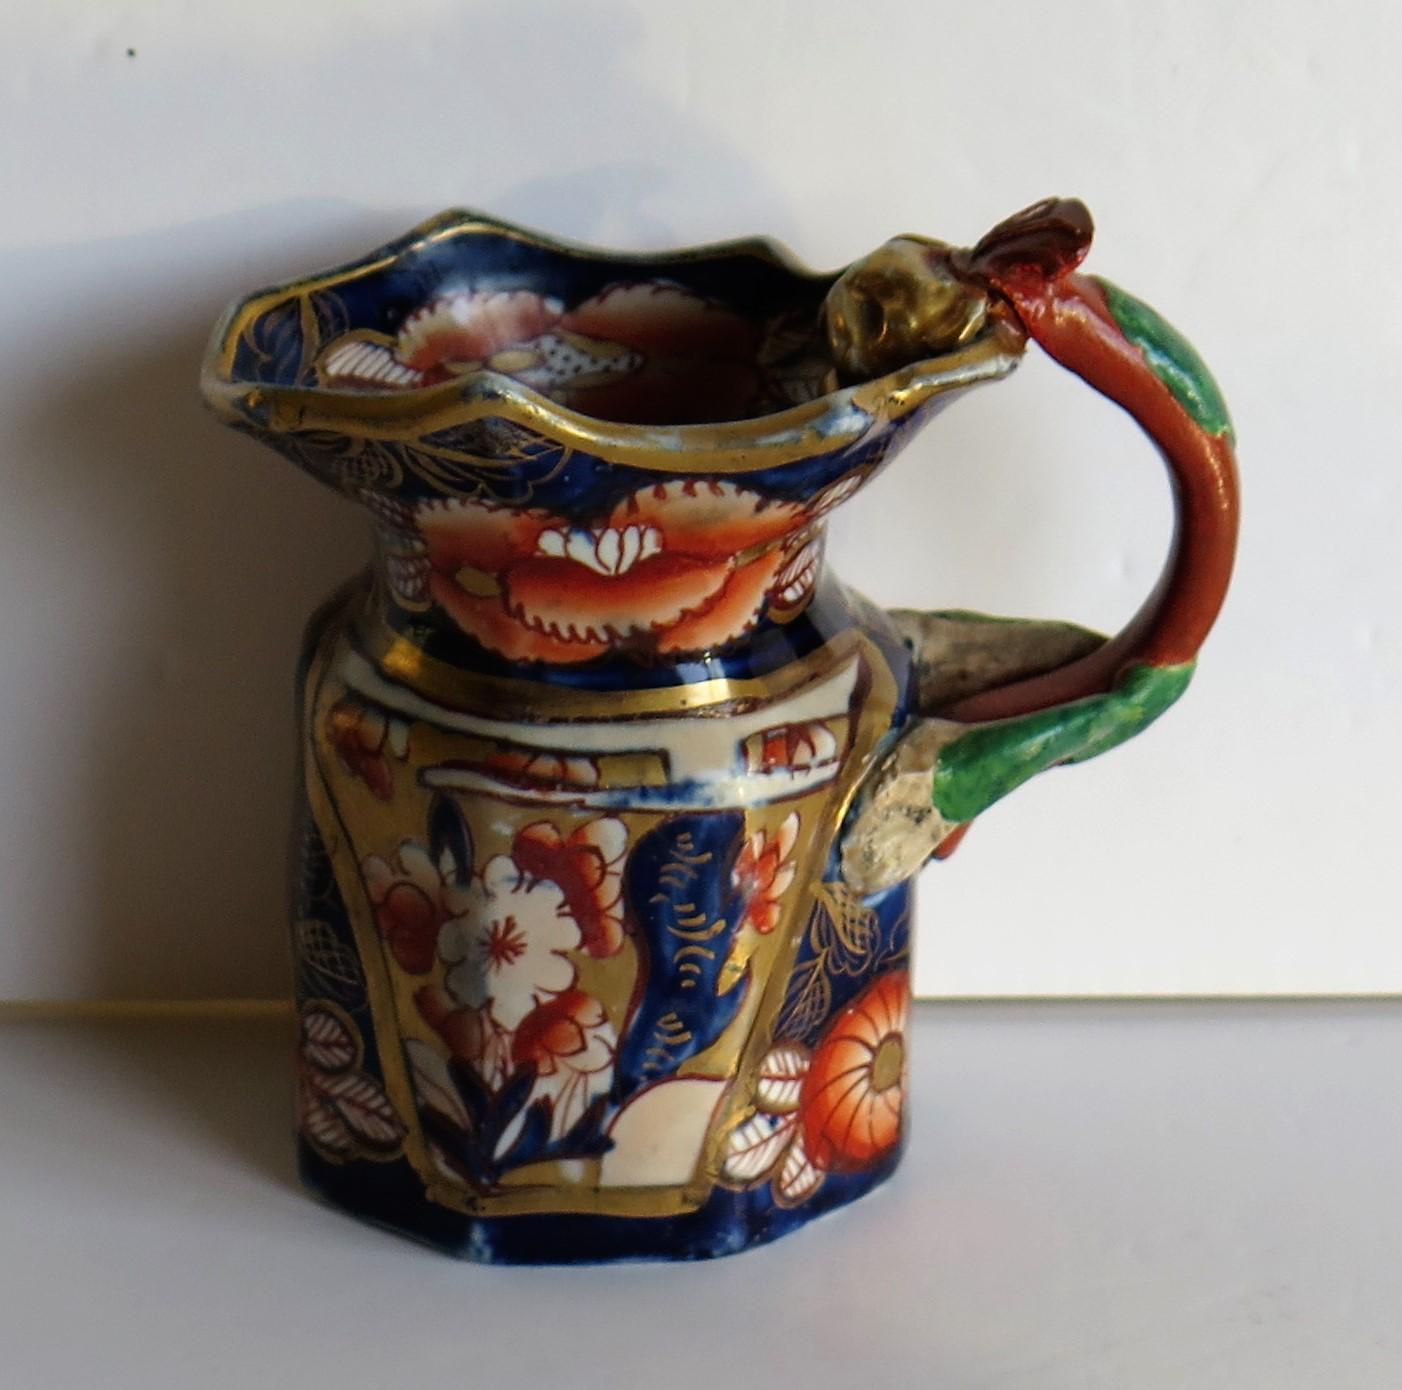 This is a fine and rare, small ironstone pottery cream jug or pitcher in the School House pattern, made by Mason's Ironstone, of Lane Delph, Staffordshire, England, circa 1820

The jug is octagonal in form with the 